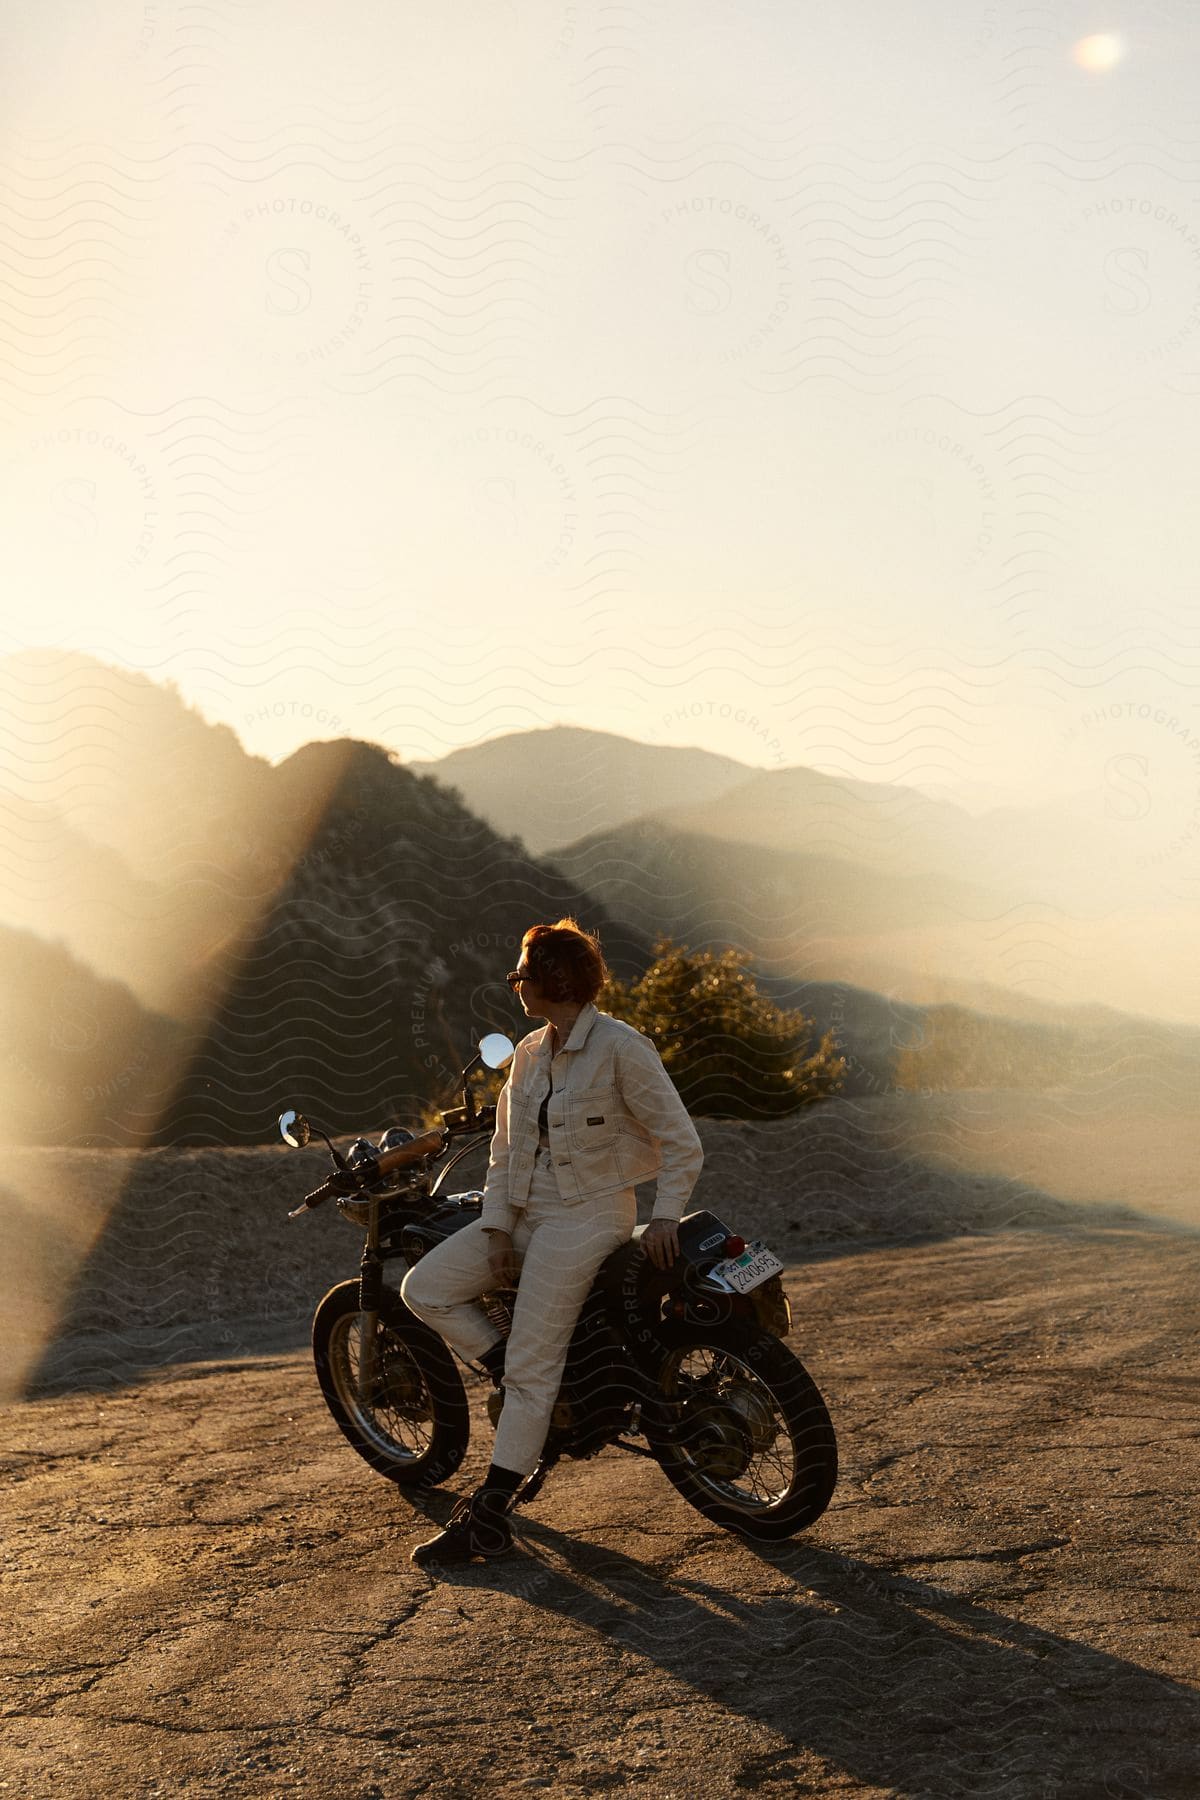 A man rides a motorcycle in the mountains at sunset